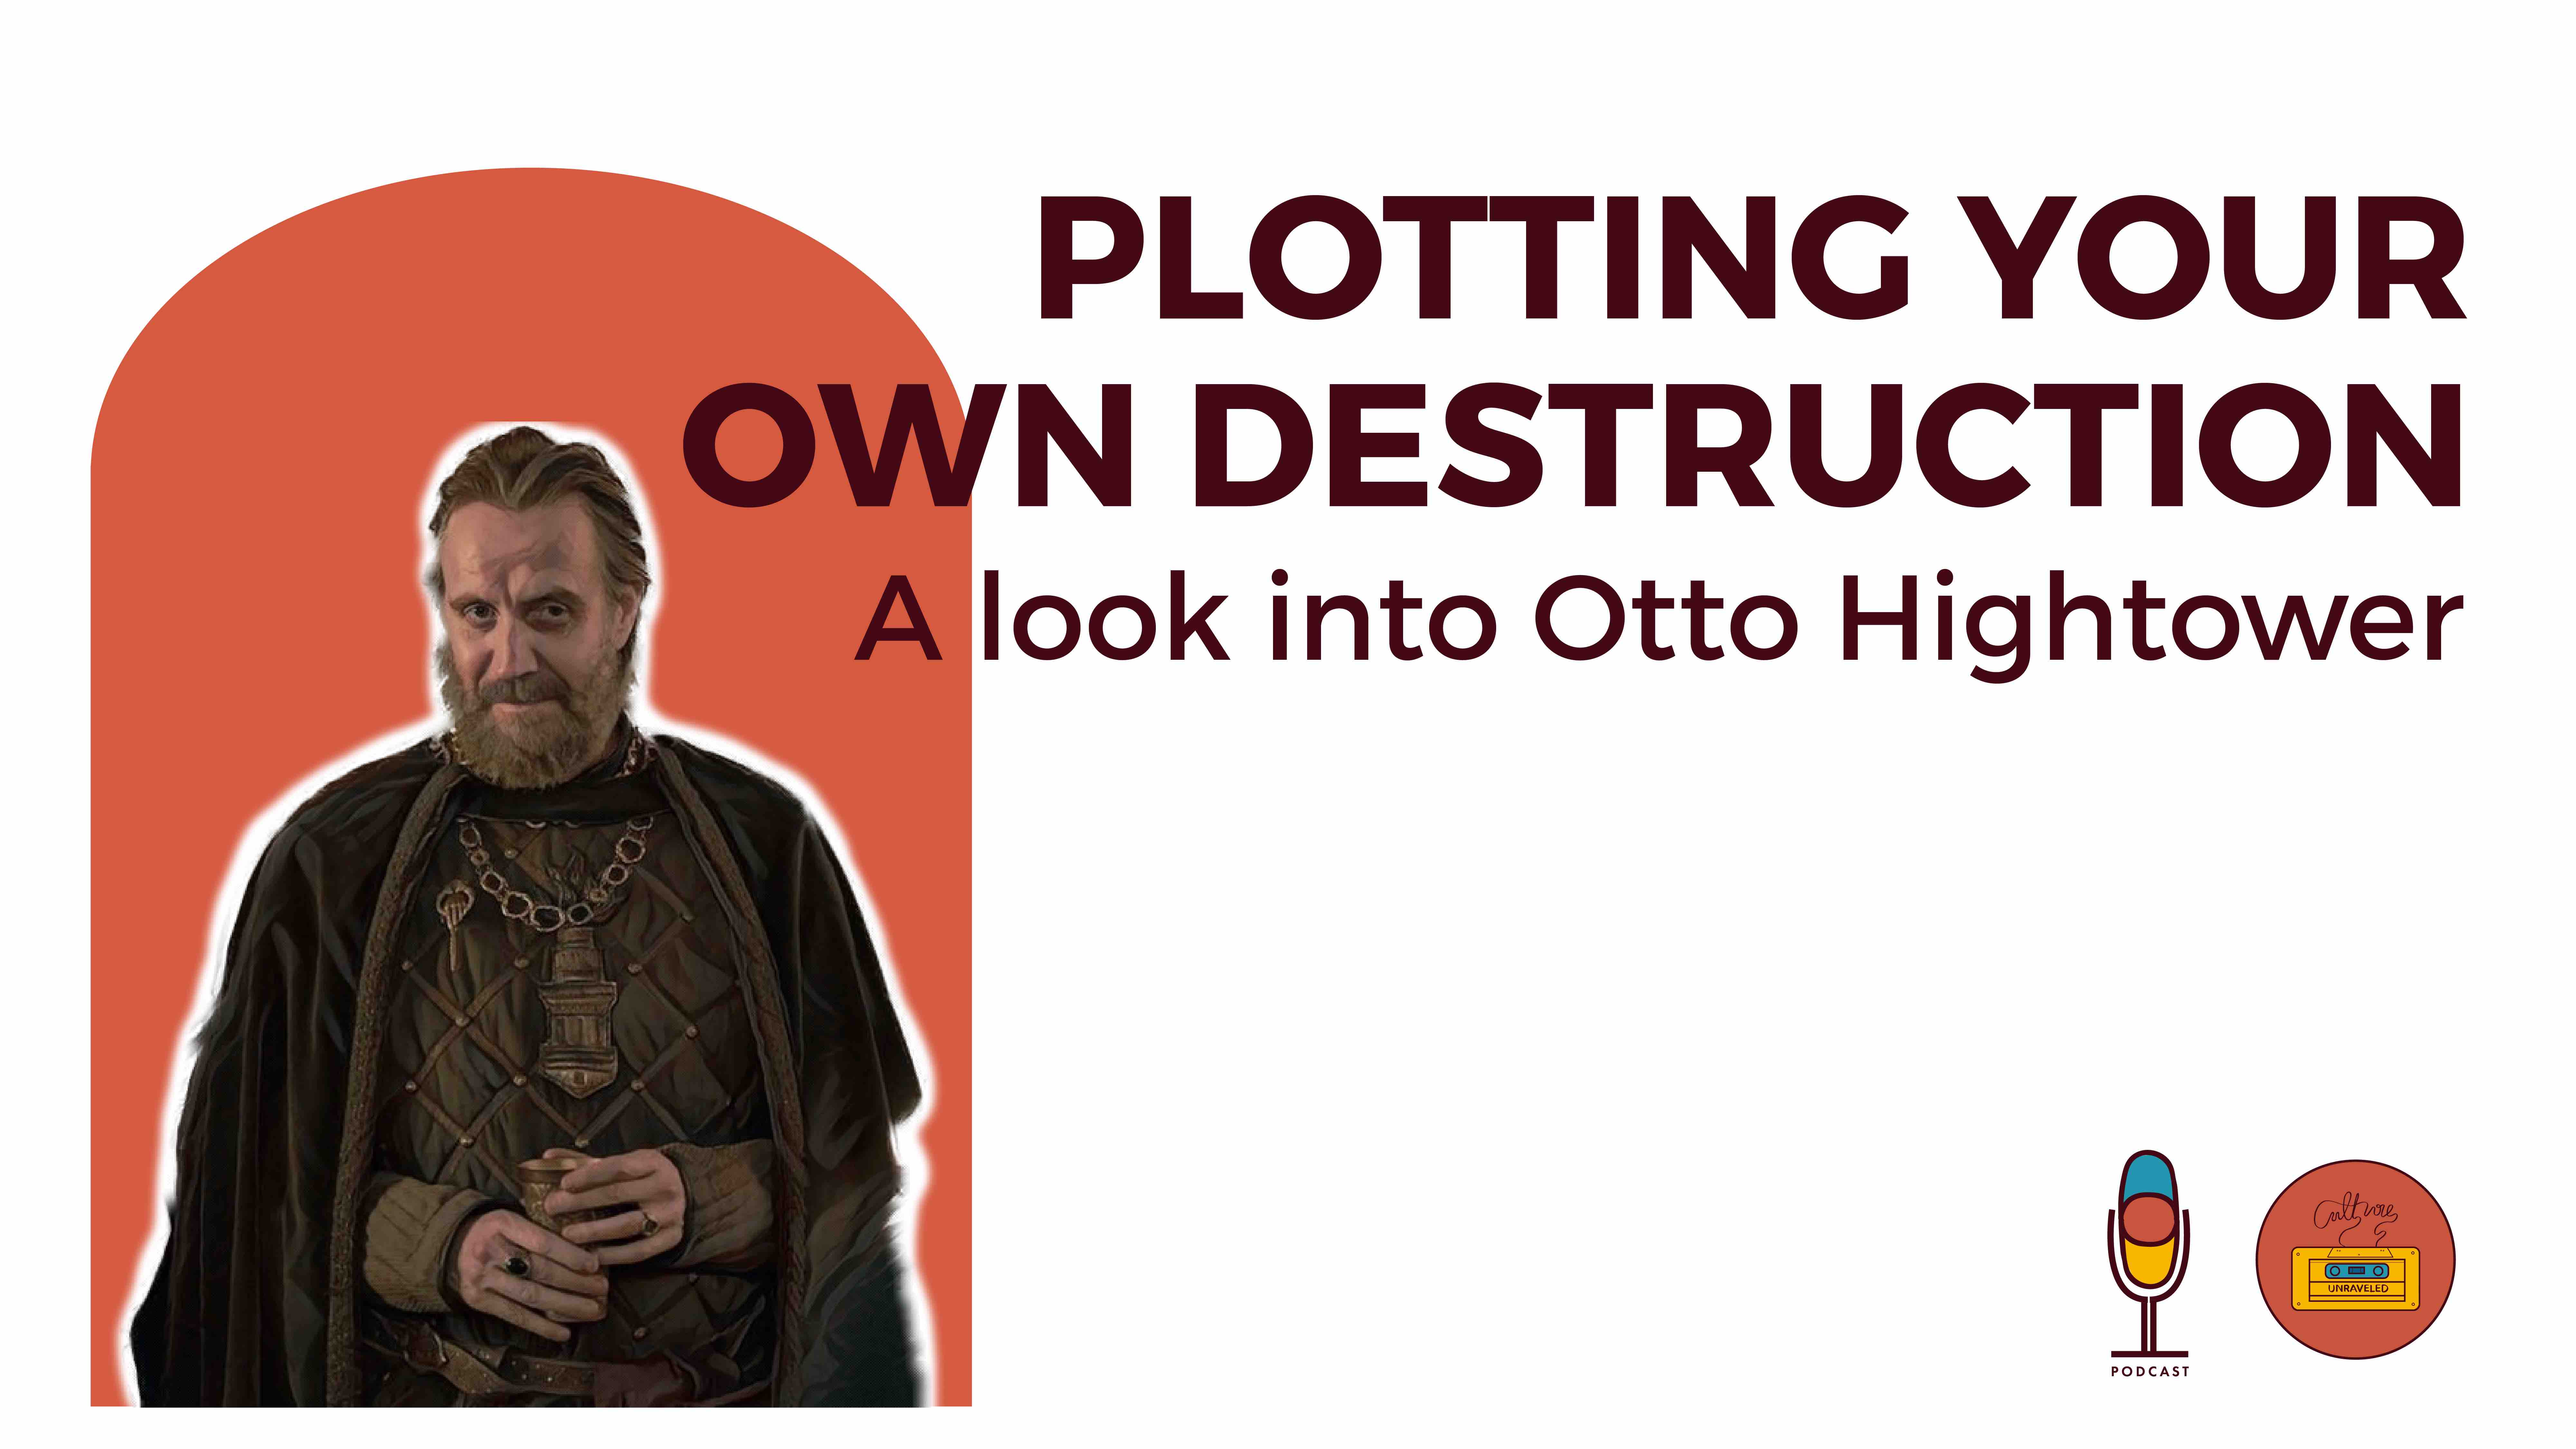 Plotting your own Destruction. A Look into Otto Hightower